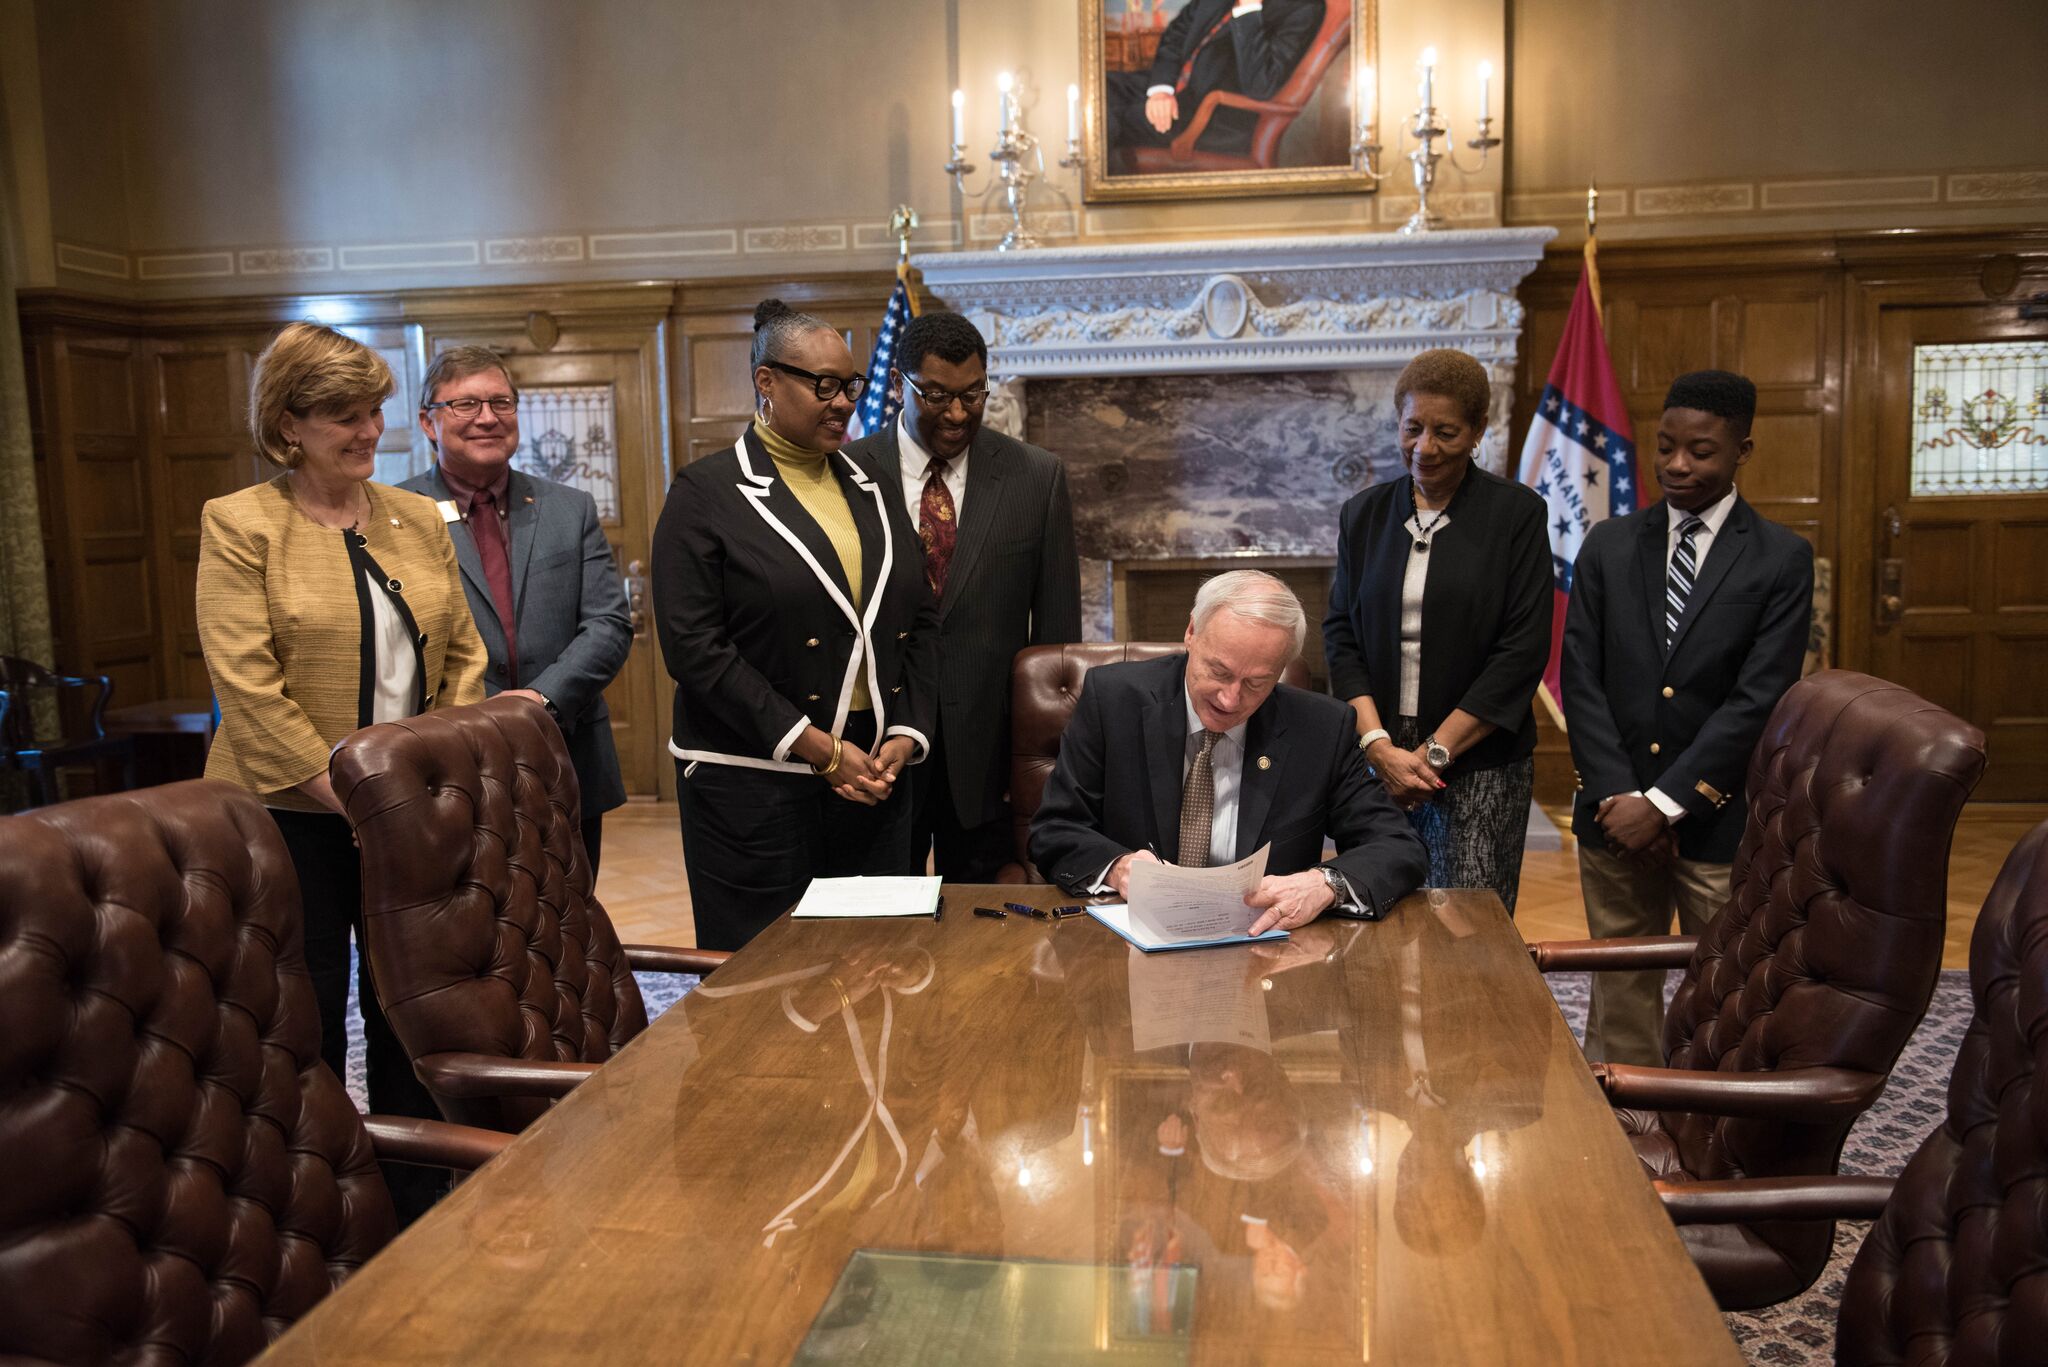 Arkansas Act 451 ceremonial signing on March 31, 2017. Credit: Governor’s office. Arkansas Governor Asa Hutchinson signs Act 451, thus designating the Delta portion of U.S. Highway 65 as the Delta Rhythm & Bayous Highway. This is one key step in the heritage tourism plan developed by the Delta Rhythm & Bayous Alliance. Credit: Arkansas Governor’s Office / governor’s office photographer